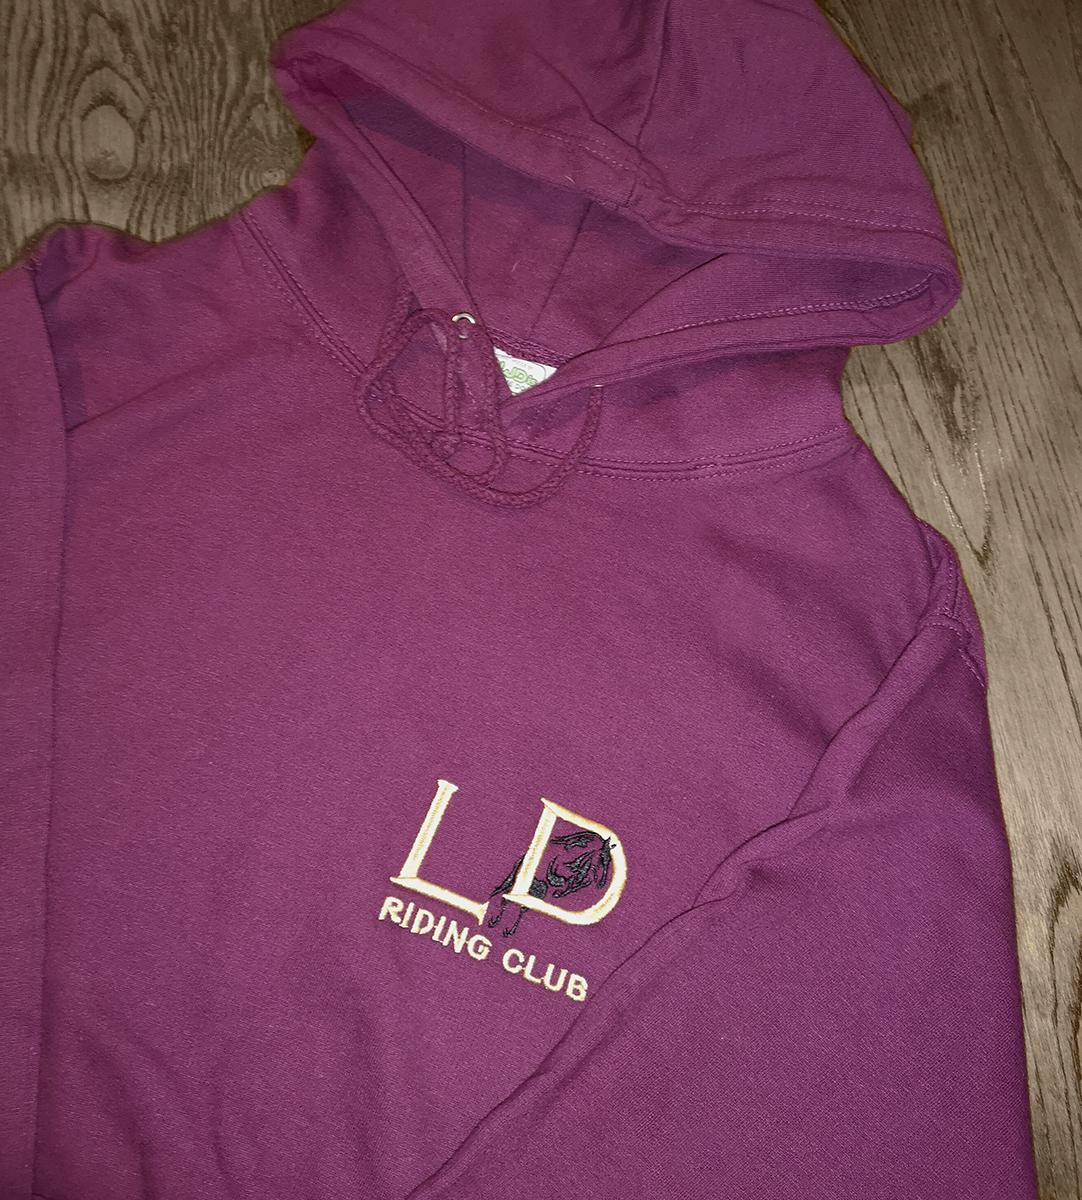 Hoody - £21.00 (front and back emb)